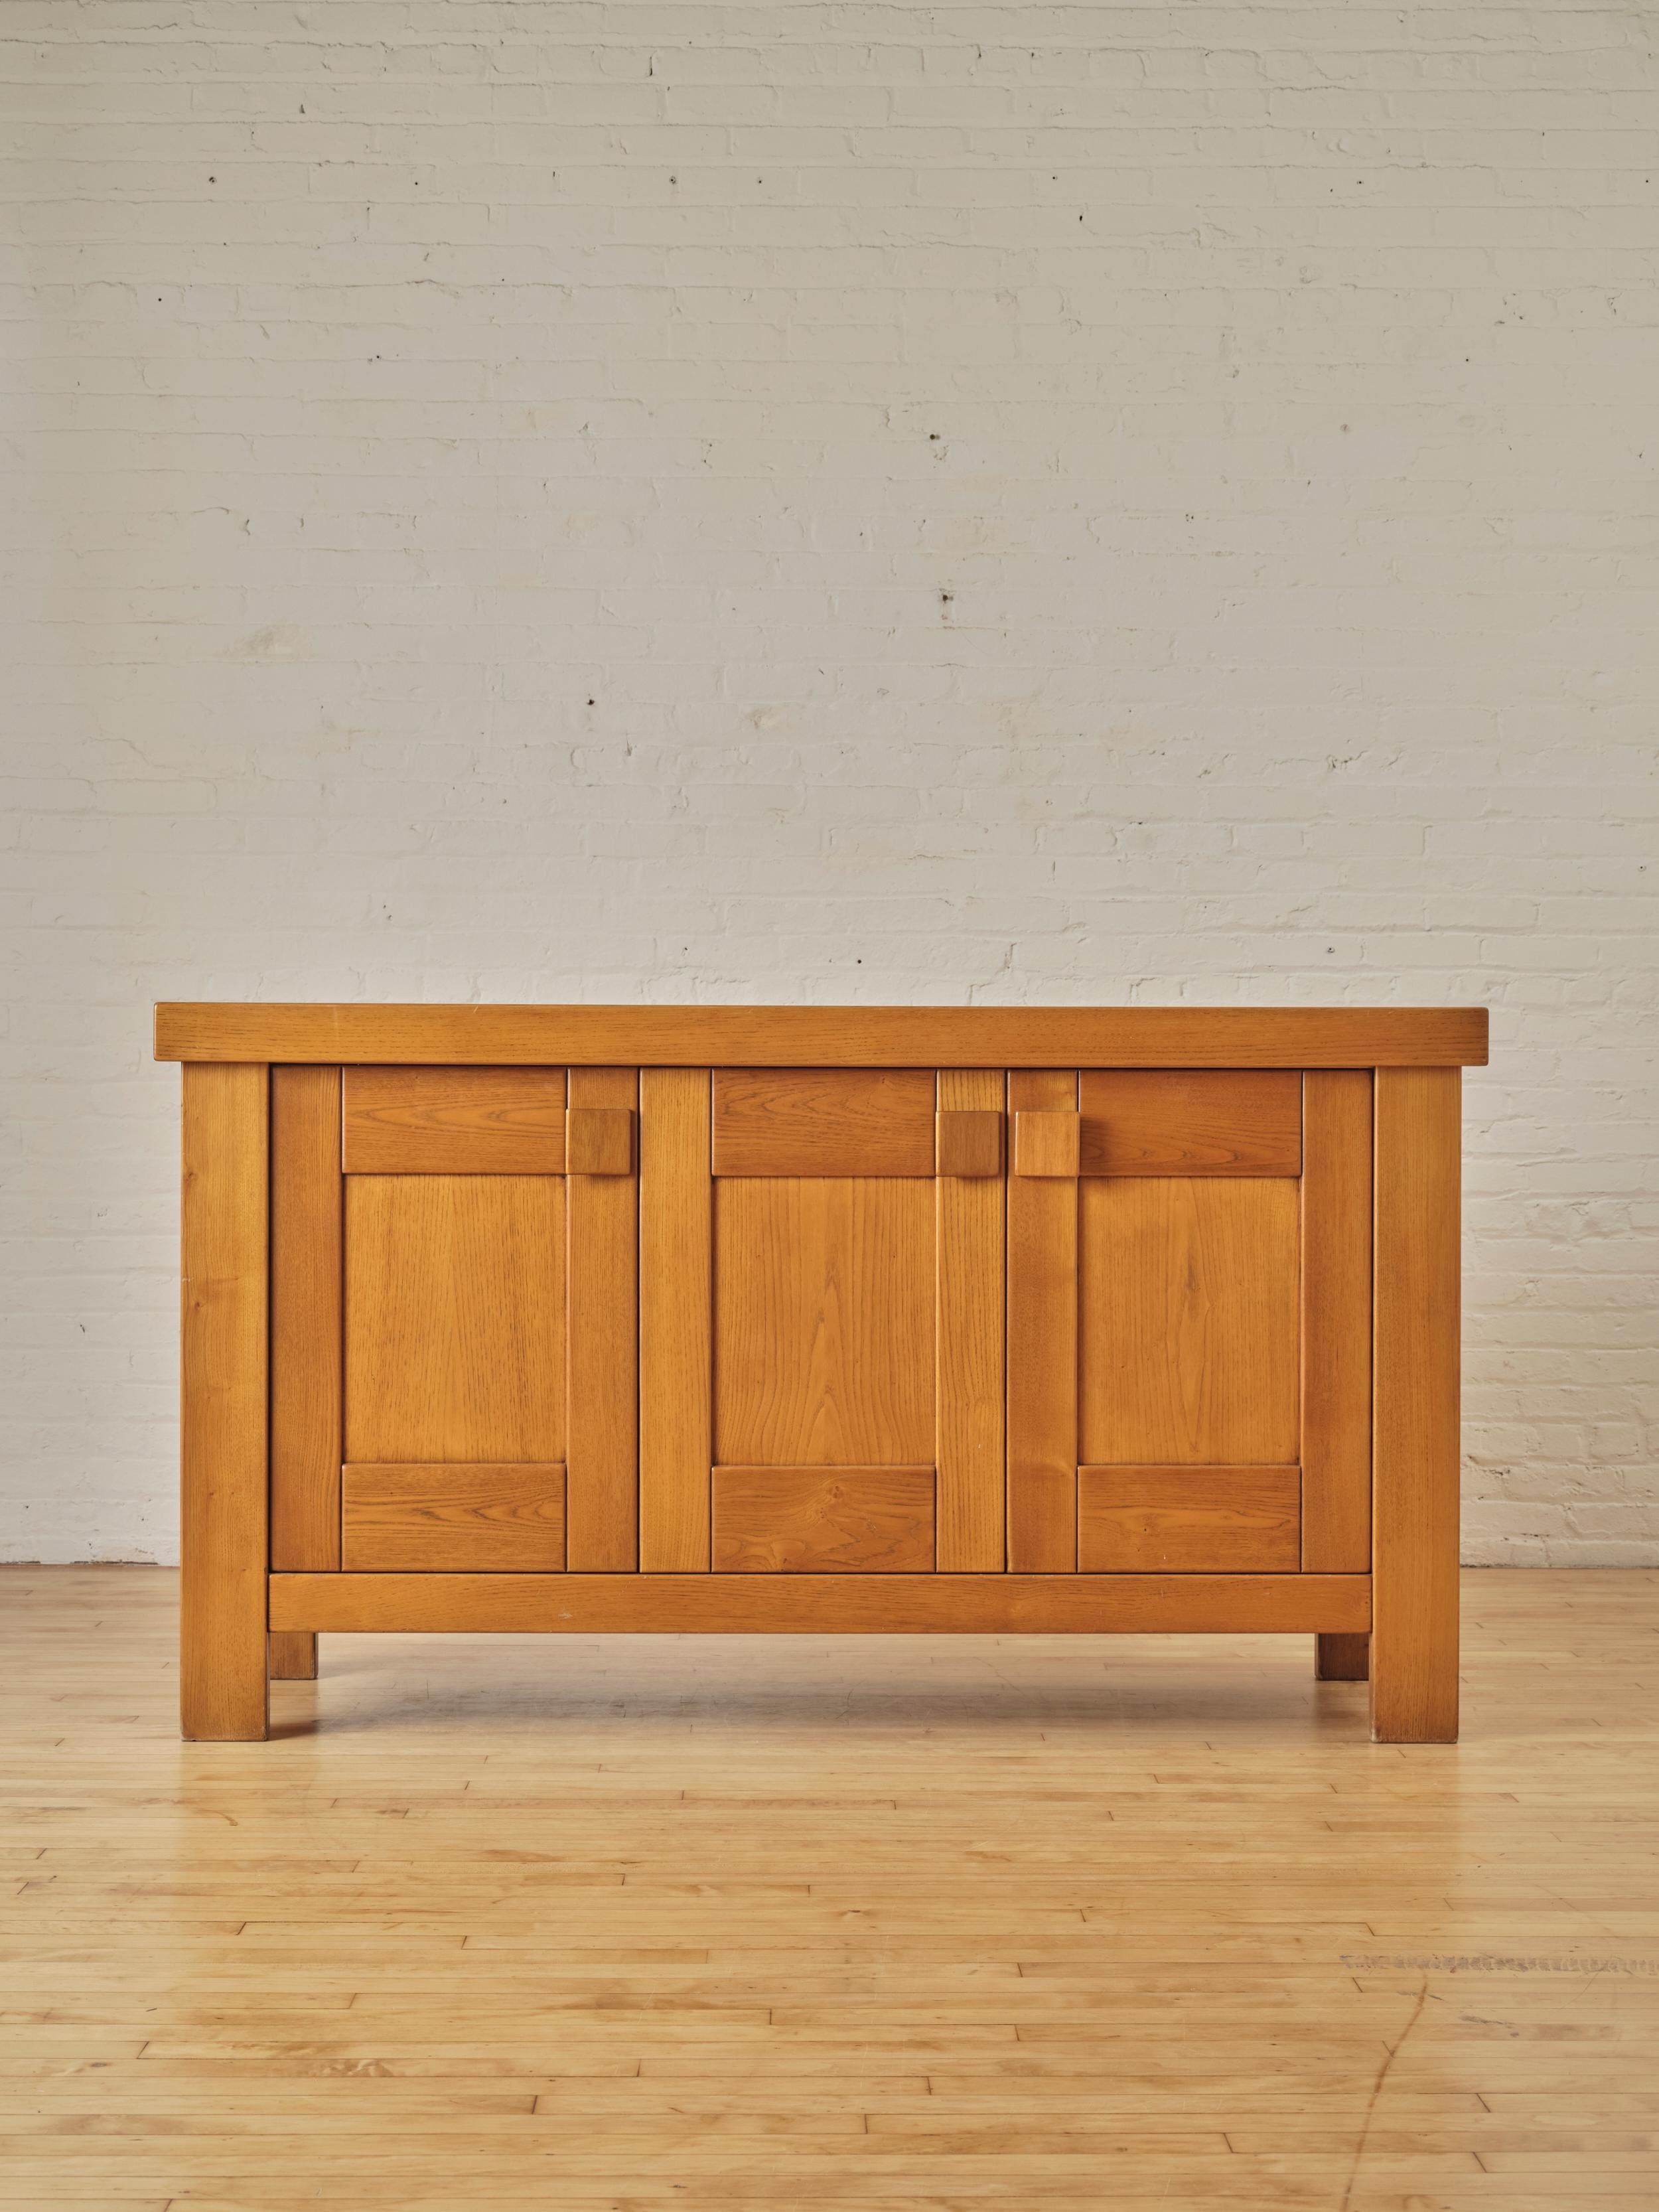 French Elm Sideboard by Maison Regain , featuring three doors with sculptural pulls that open up to reveal a single shelving unit.

